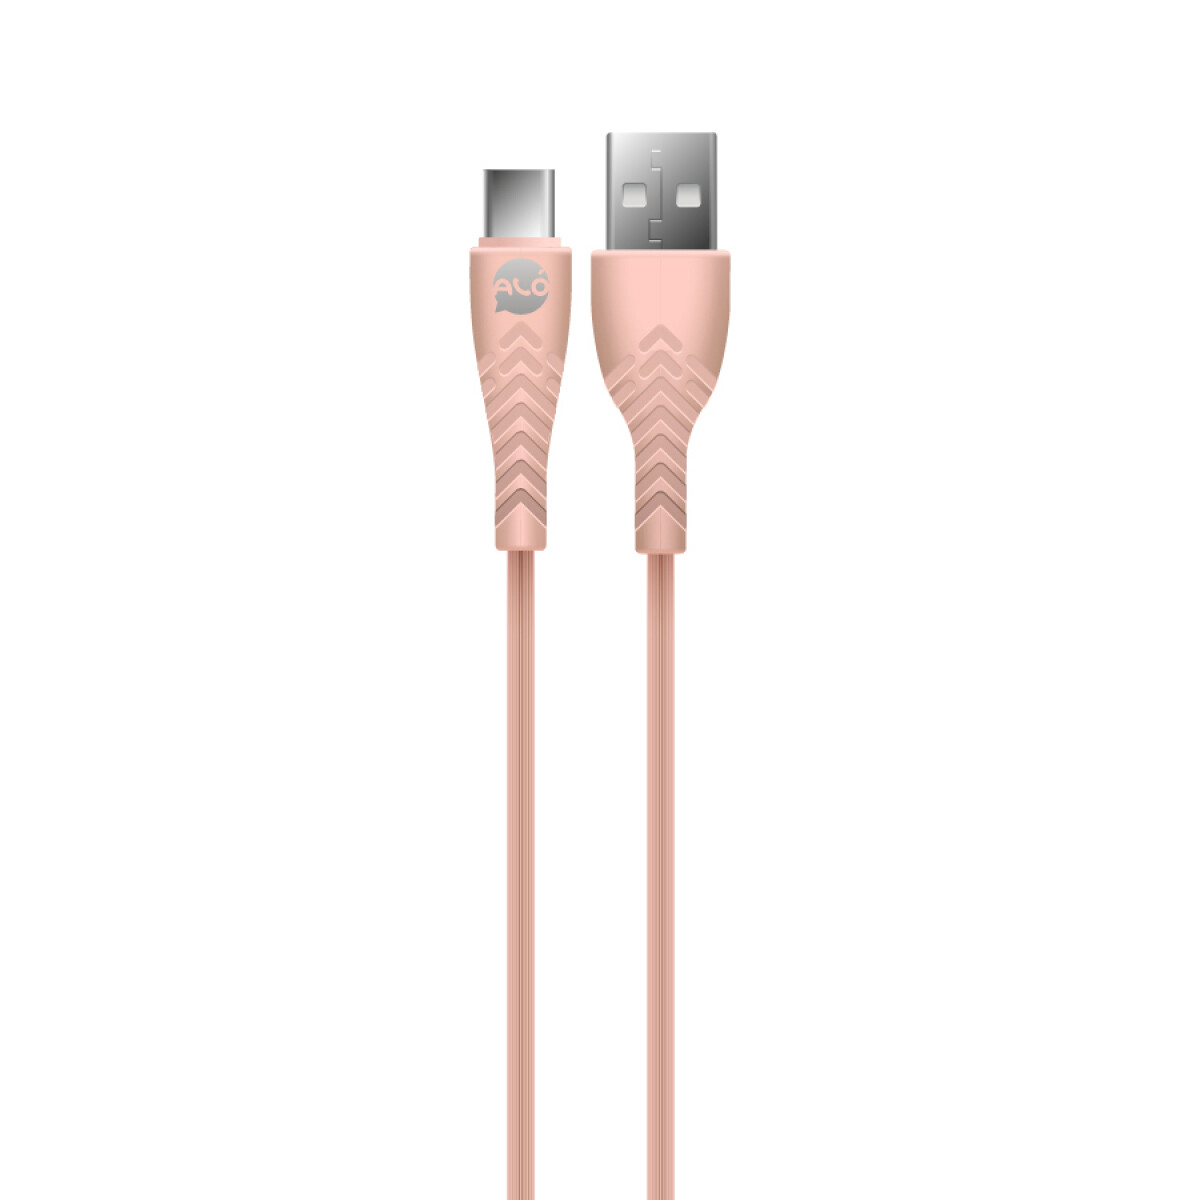 Cable USB A - TYPE-C 3.1A 1m ALO FLASH - Pink sand 